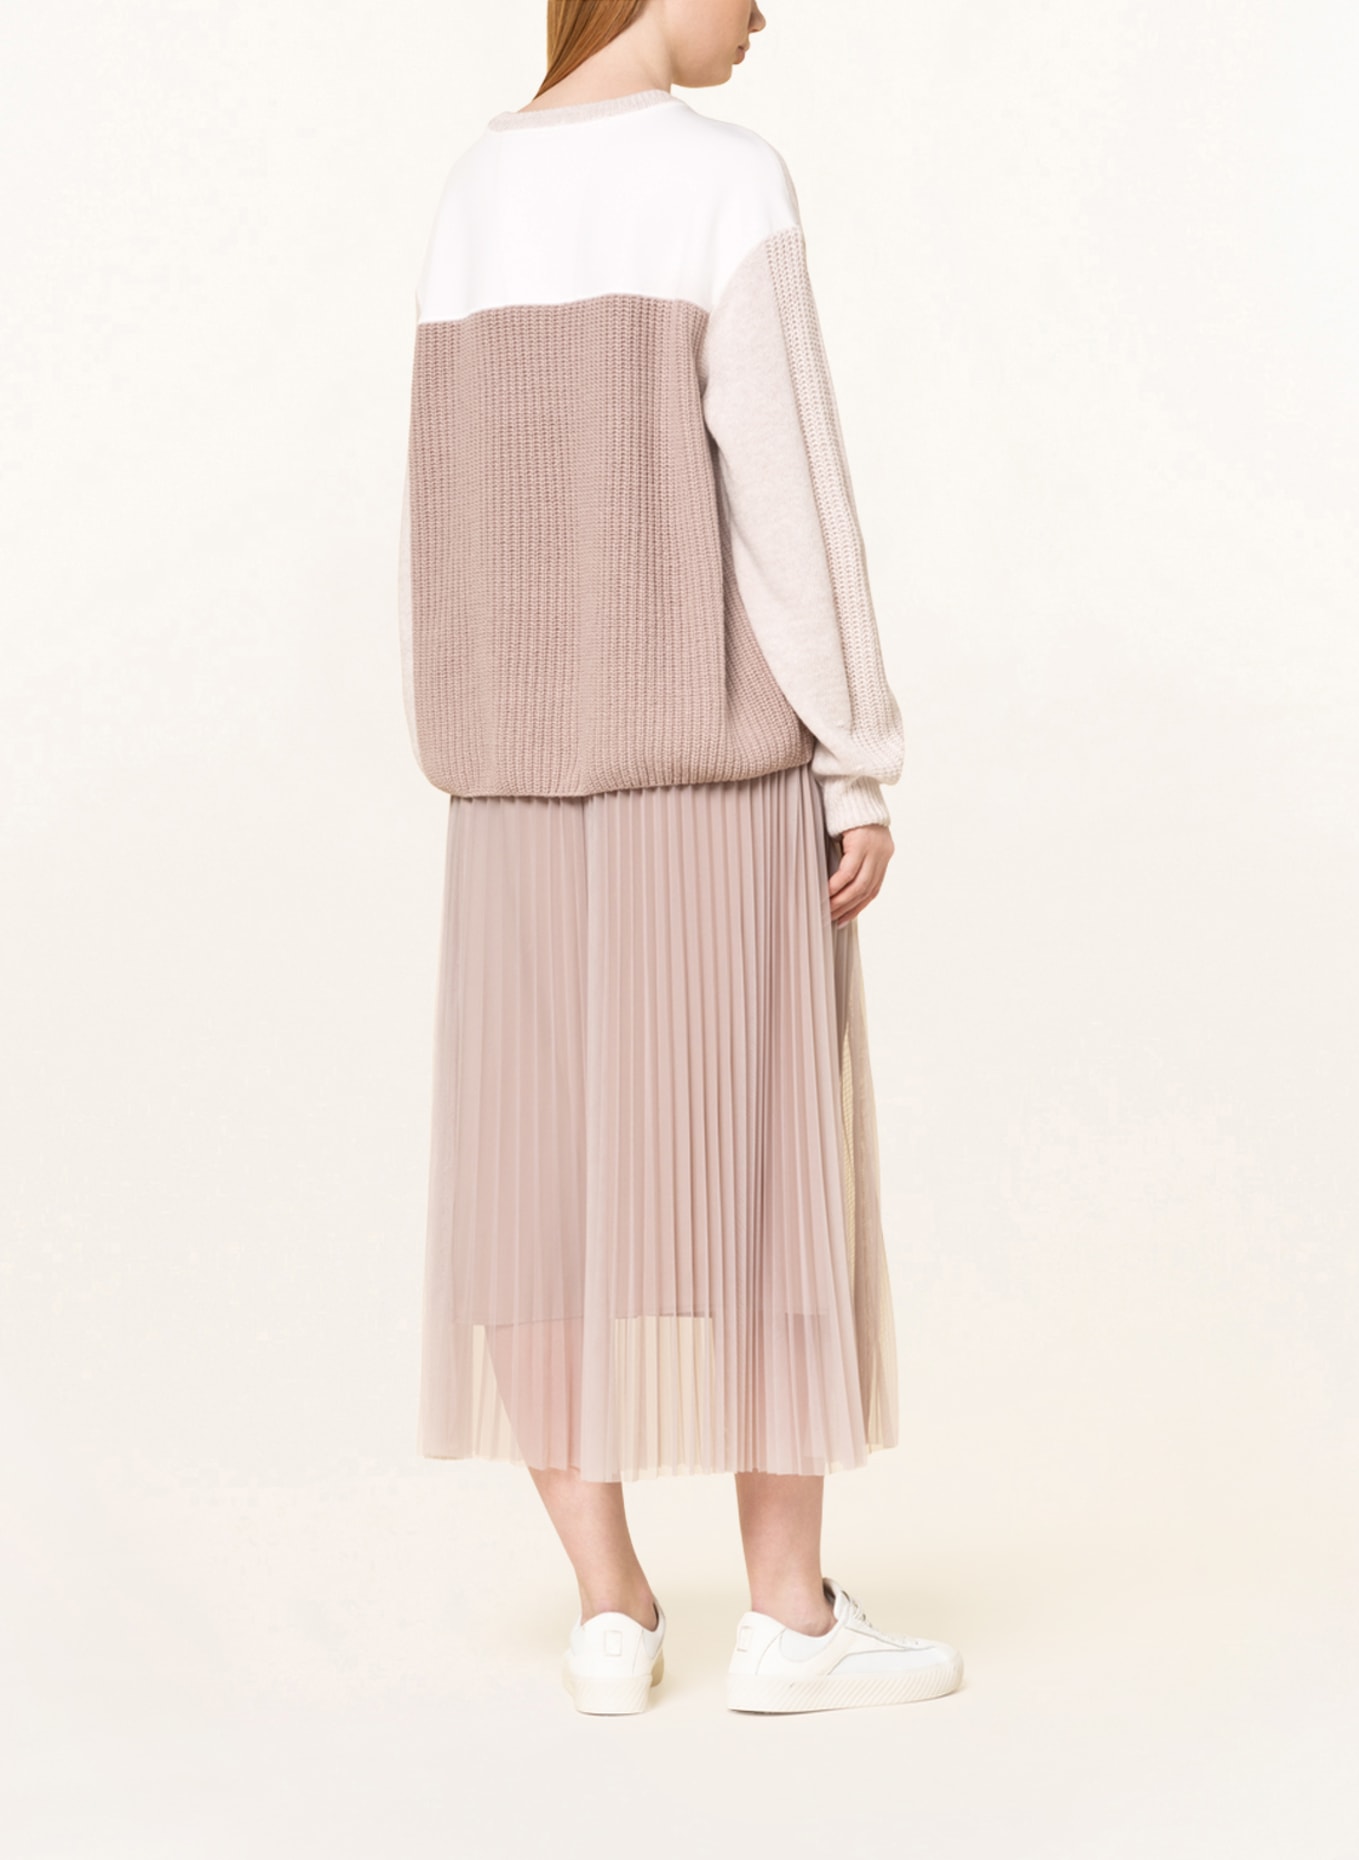 MARC CAIN Sweater in mixed materials, Color: 609 light taupe (Image 3)